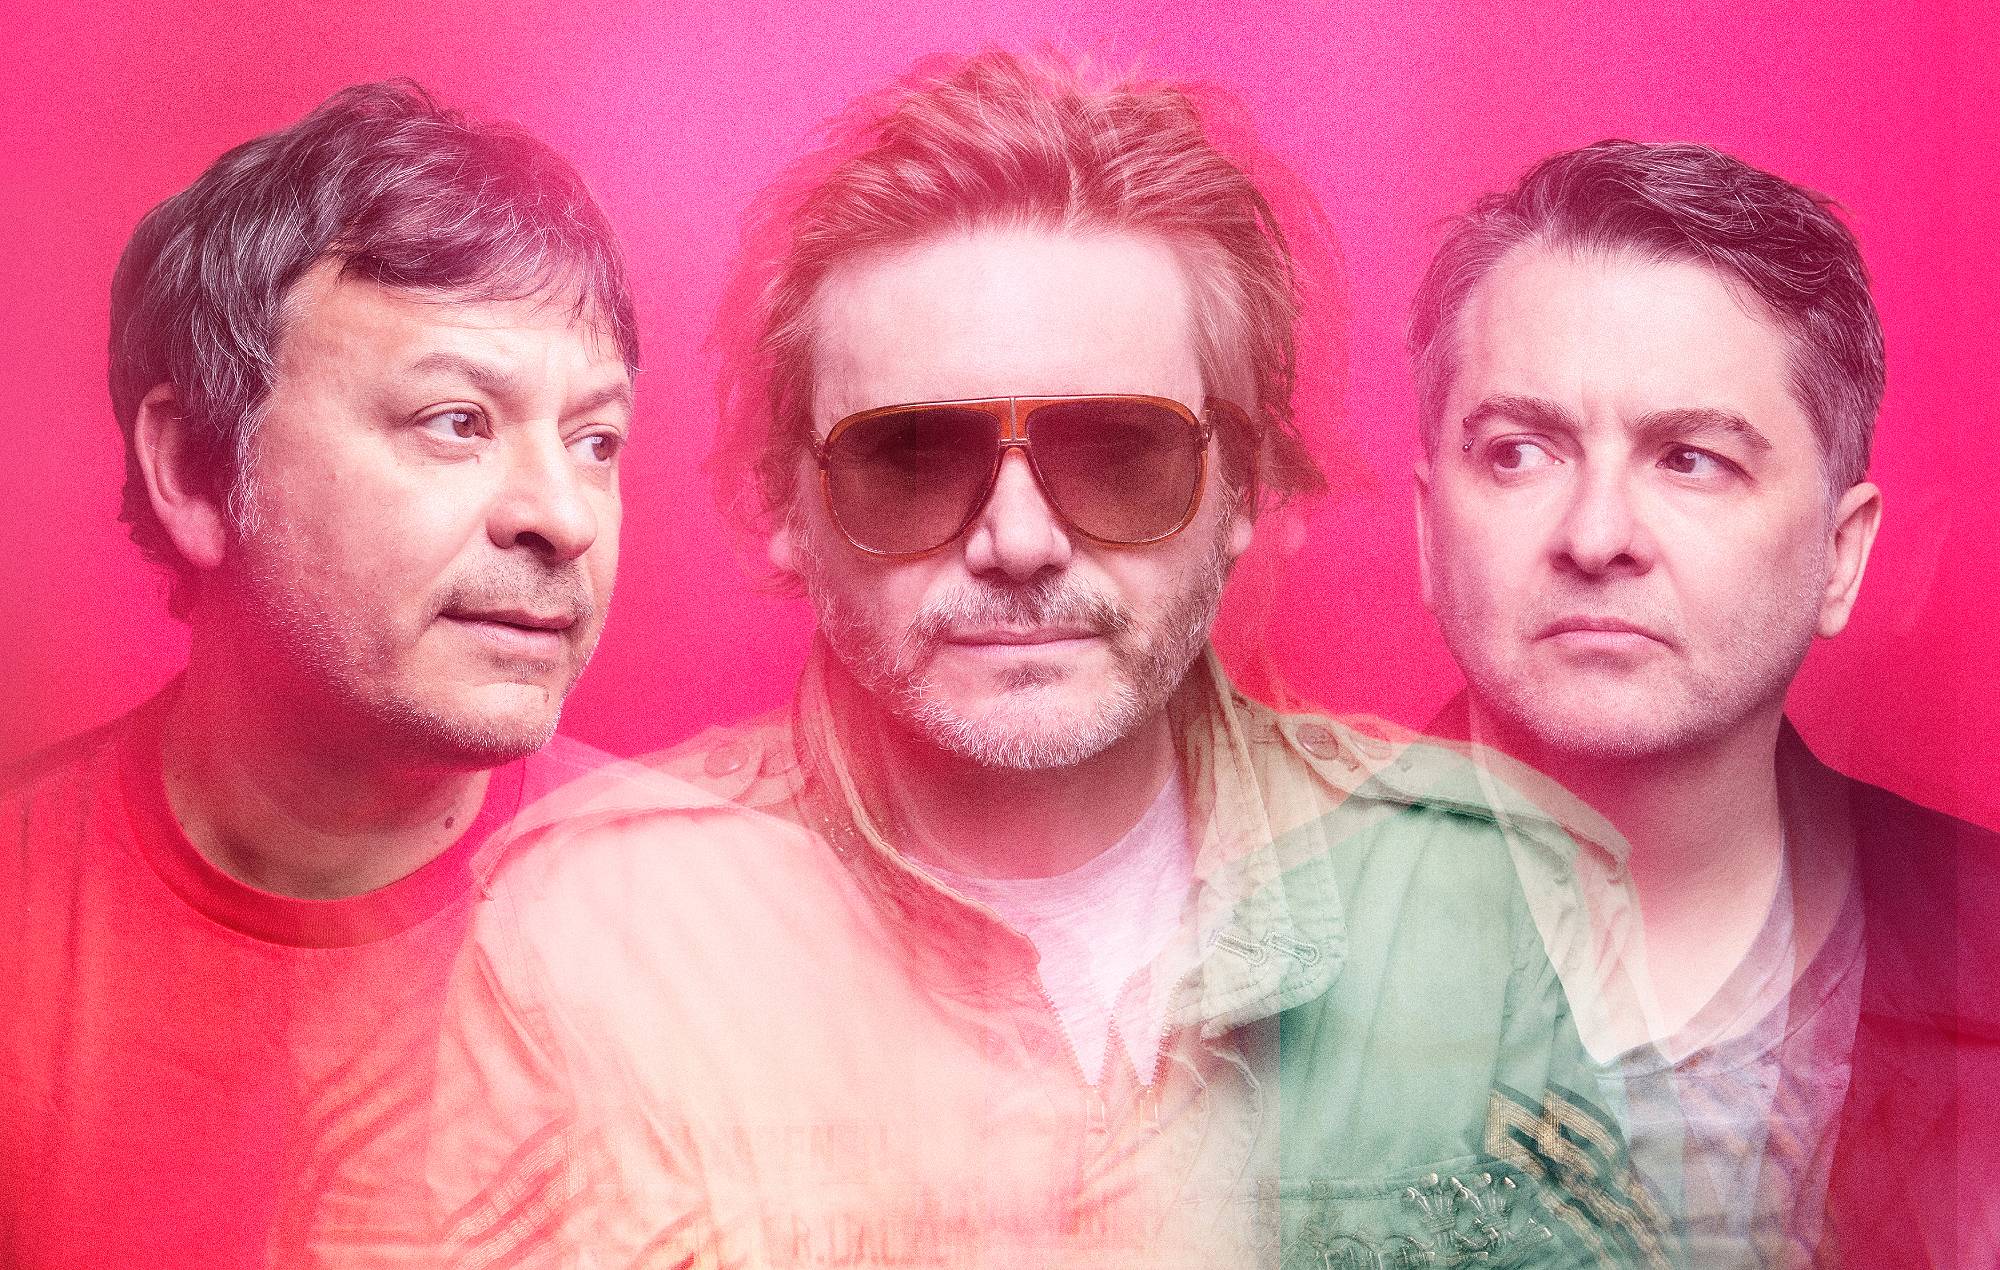 The Manics tell us about their new single with Sunflower Bean’s Julia Cumming